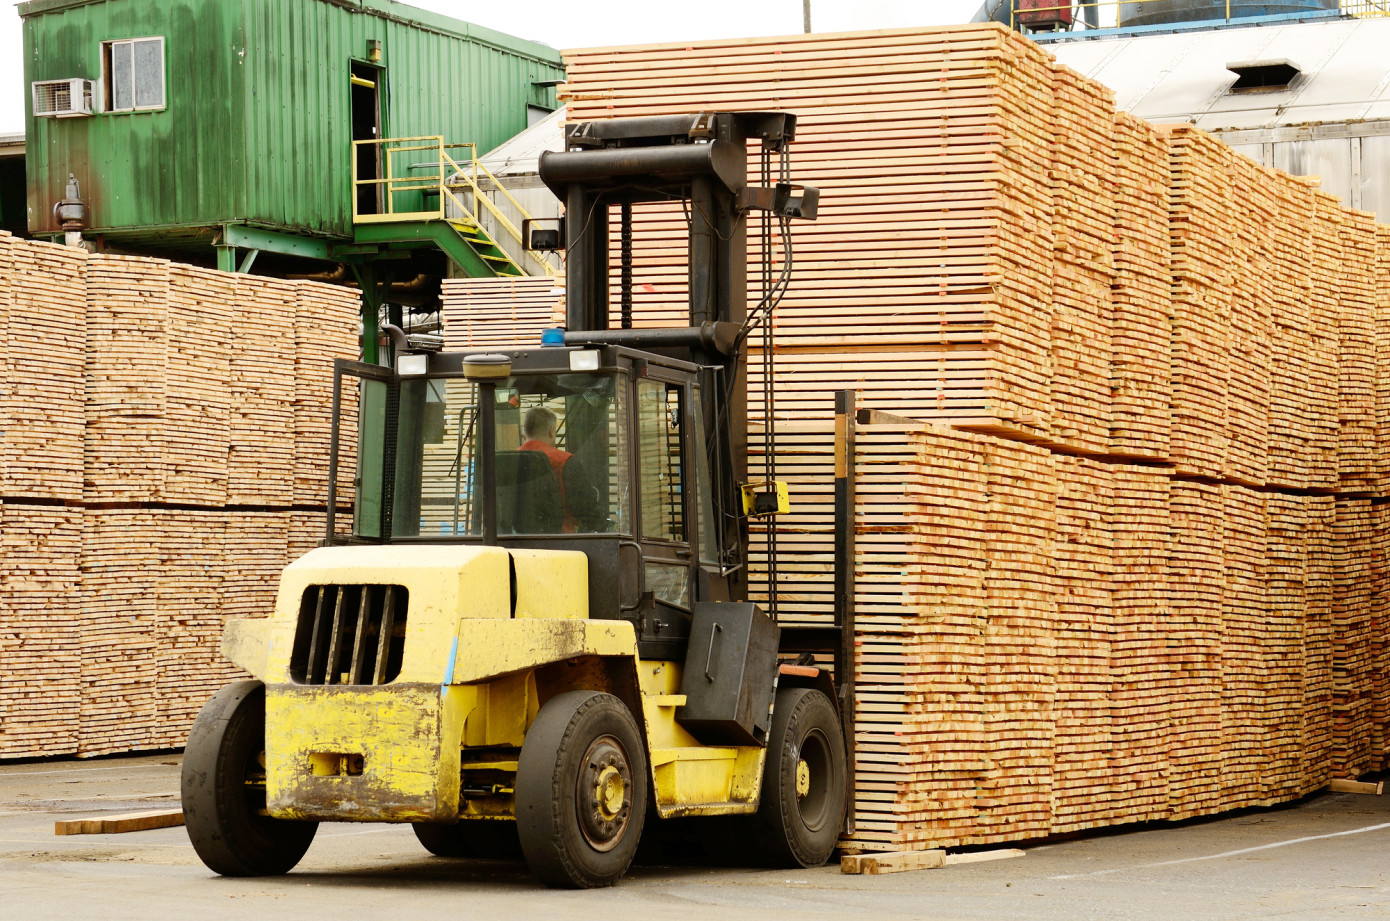 In April, price for lumber exported from New Zealand slides 1.9%